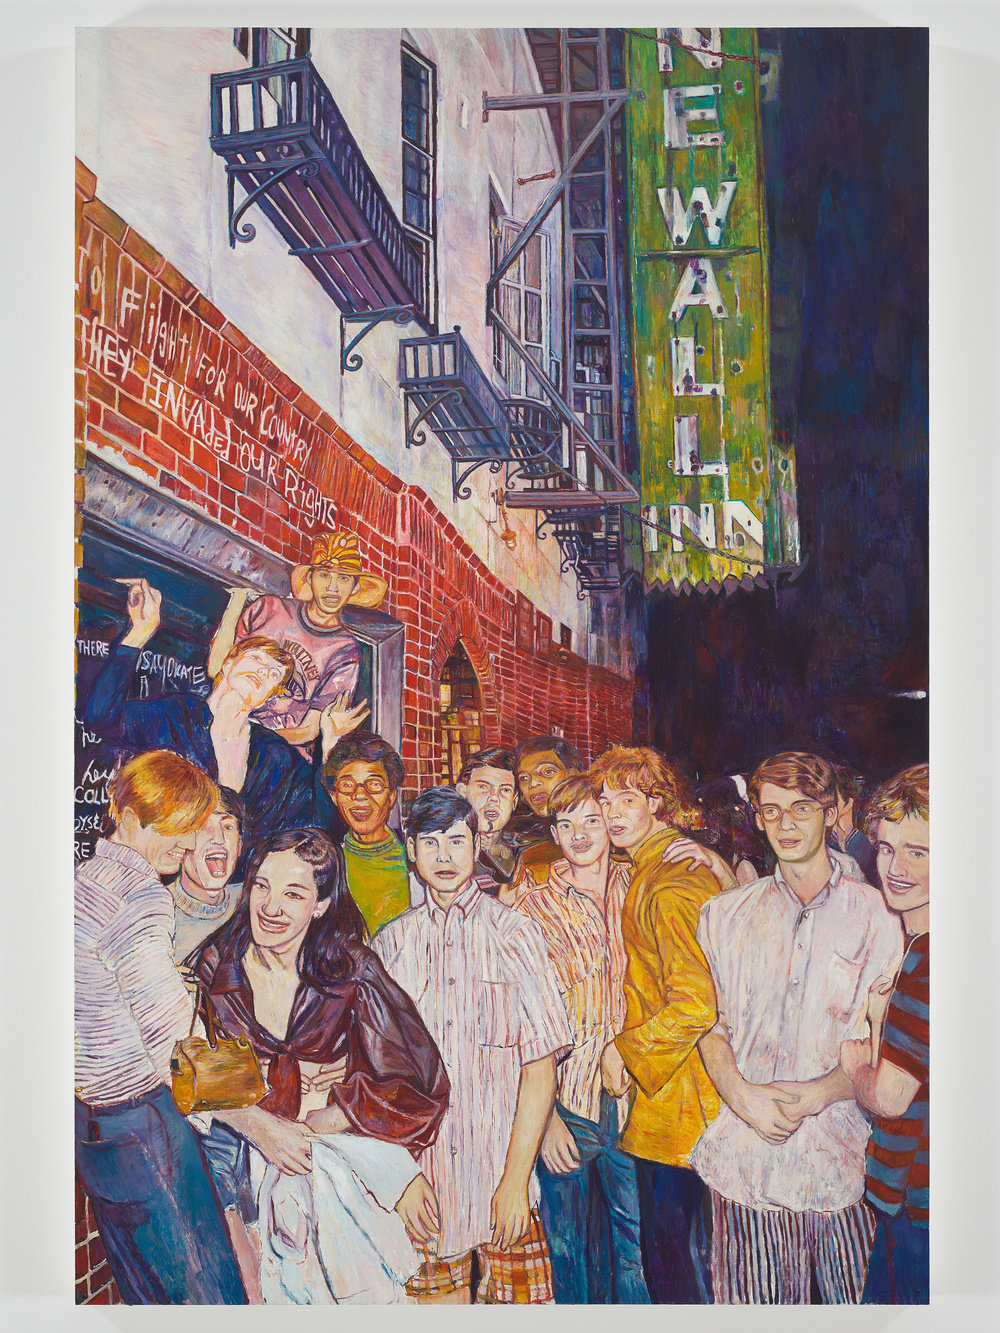 Mayerson, stonewall (after fred w. mcdarrah), 2018, oil on linen, 60 x 40 in., 152.4 x 101.6 cm, cnon 60.532